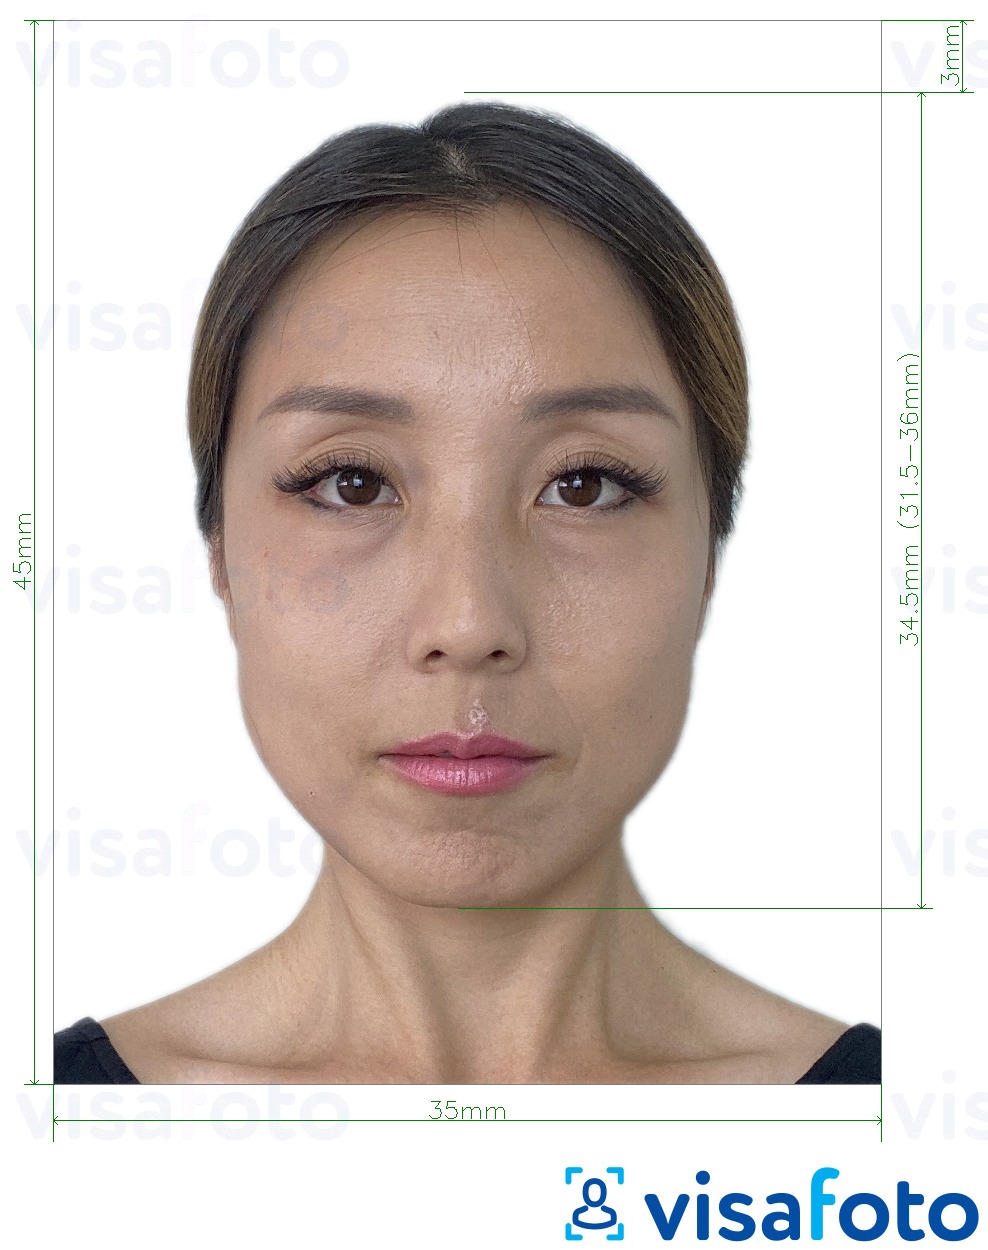 Example of photo for South Korea driving license 35x45 mm with exact size specification